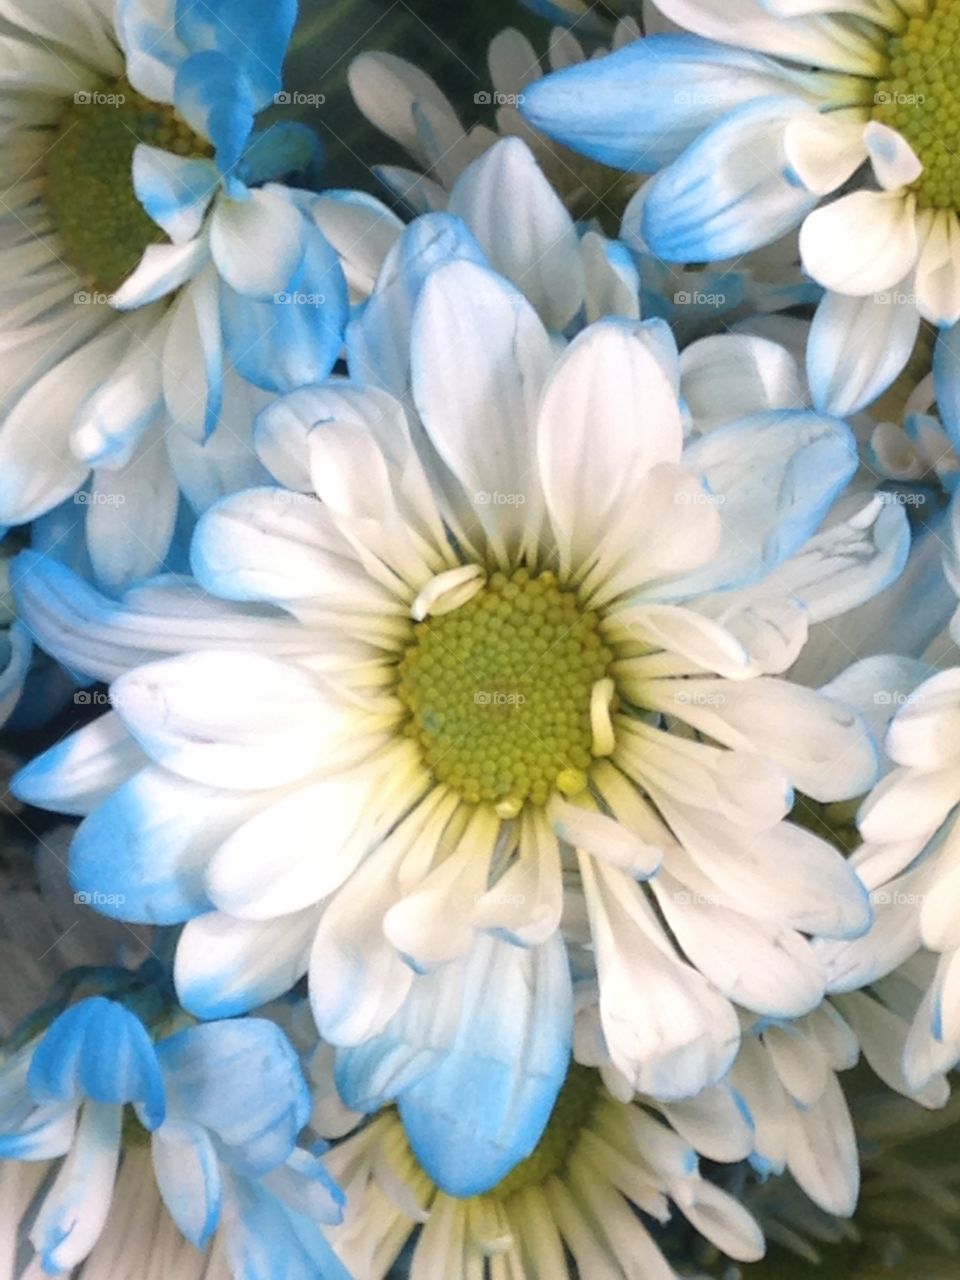 A blue and white daisy.